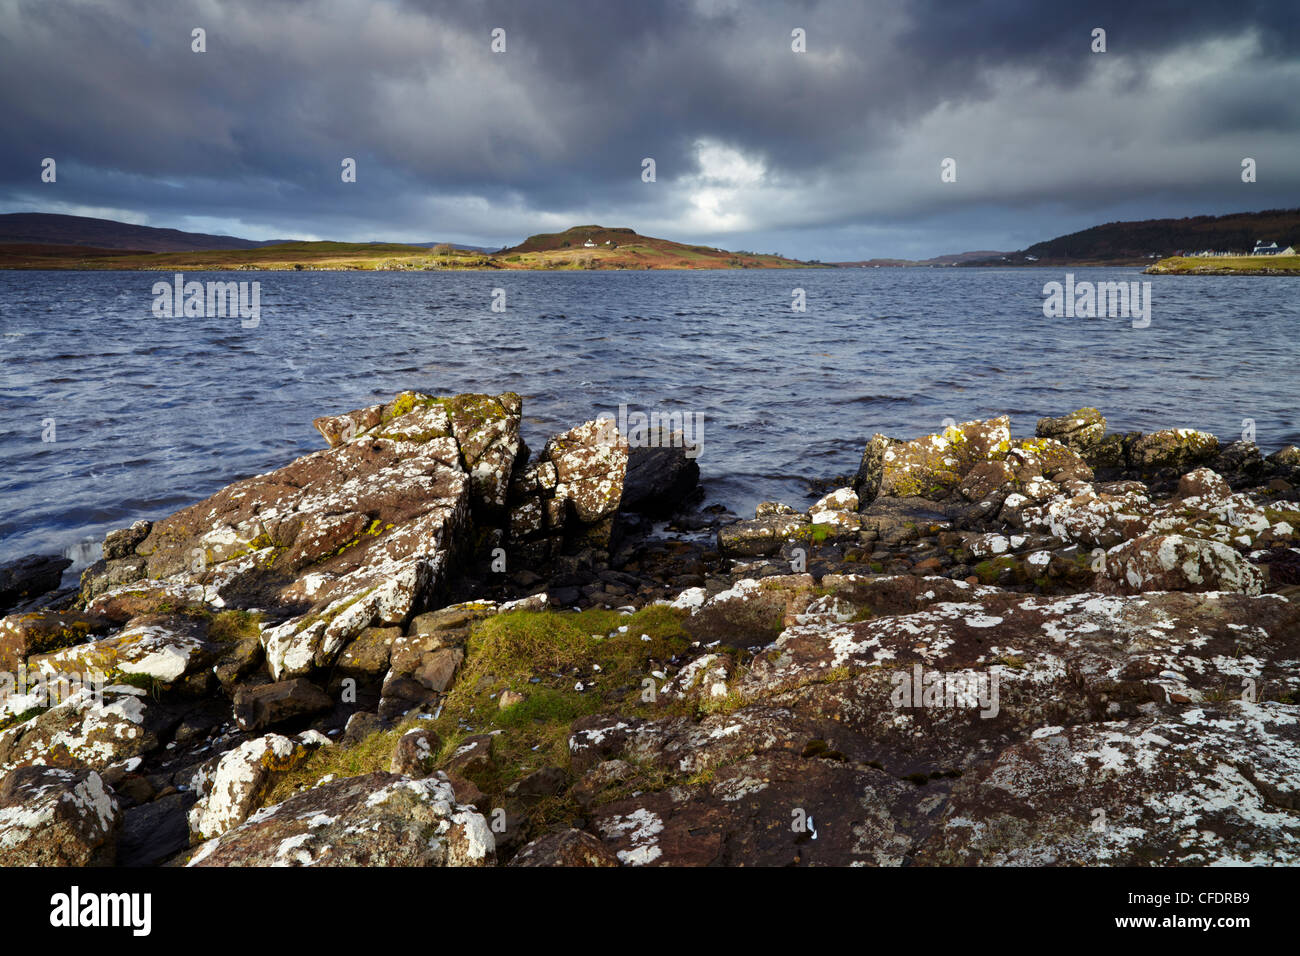 Stormy conditions at Loch Dunvegan, Isle of Skye, Scotland, United Kingdom, Europe Stock Photo